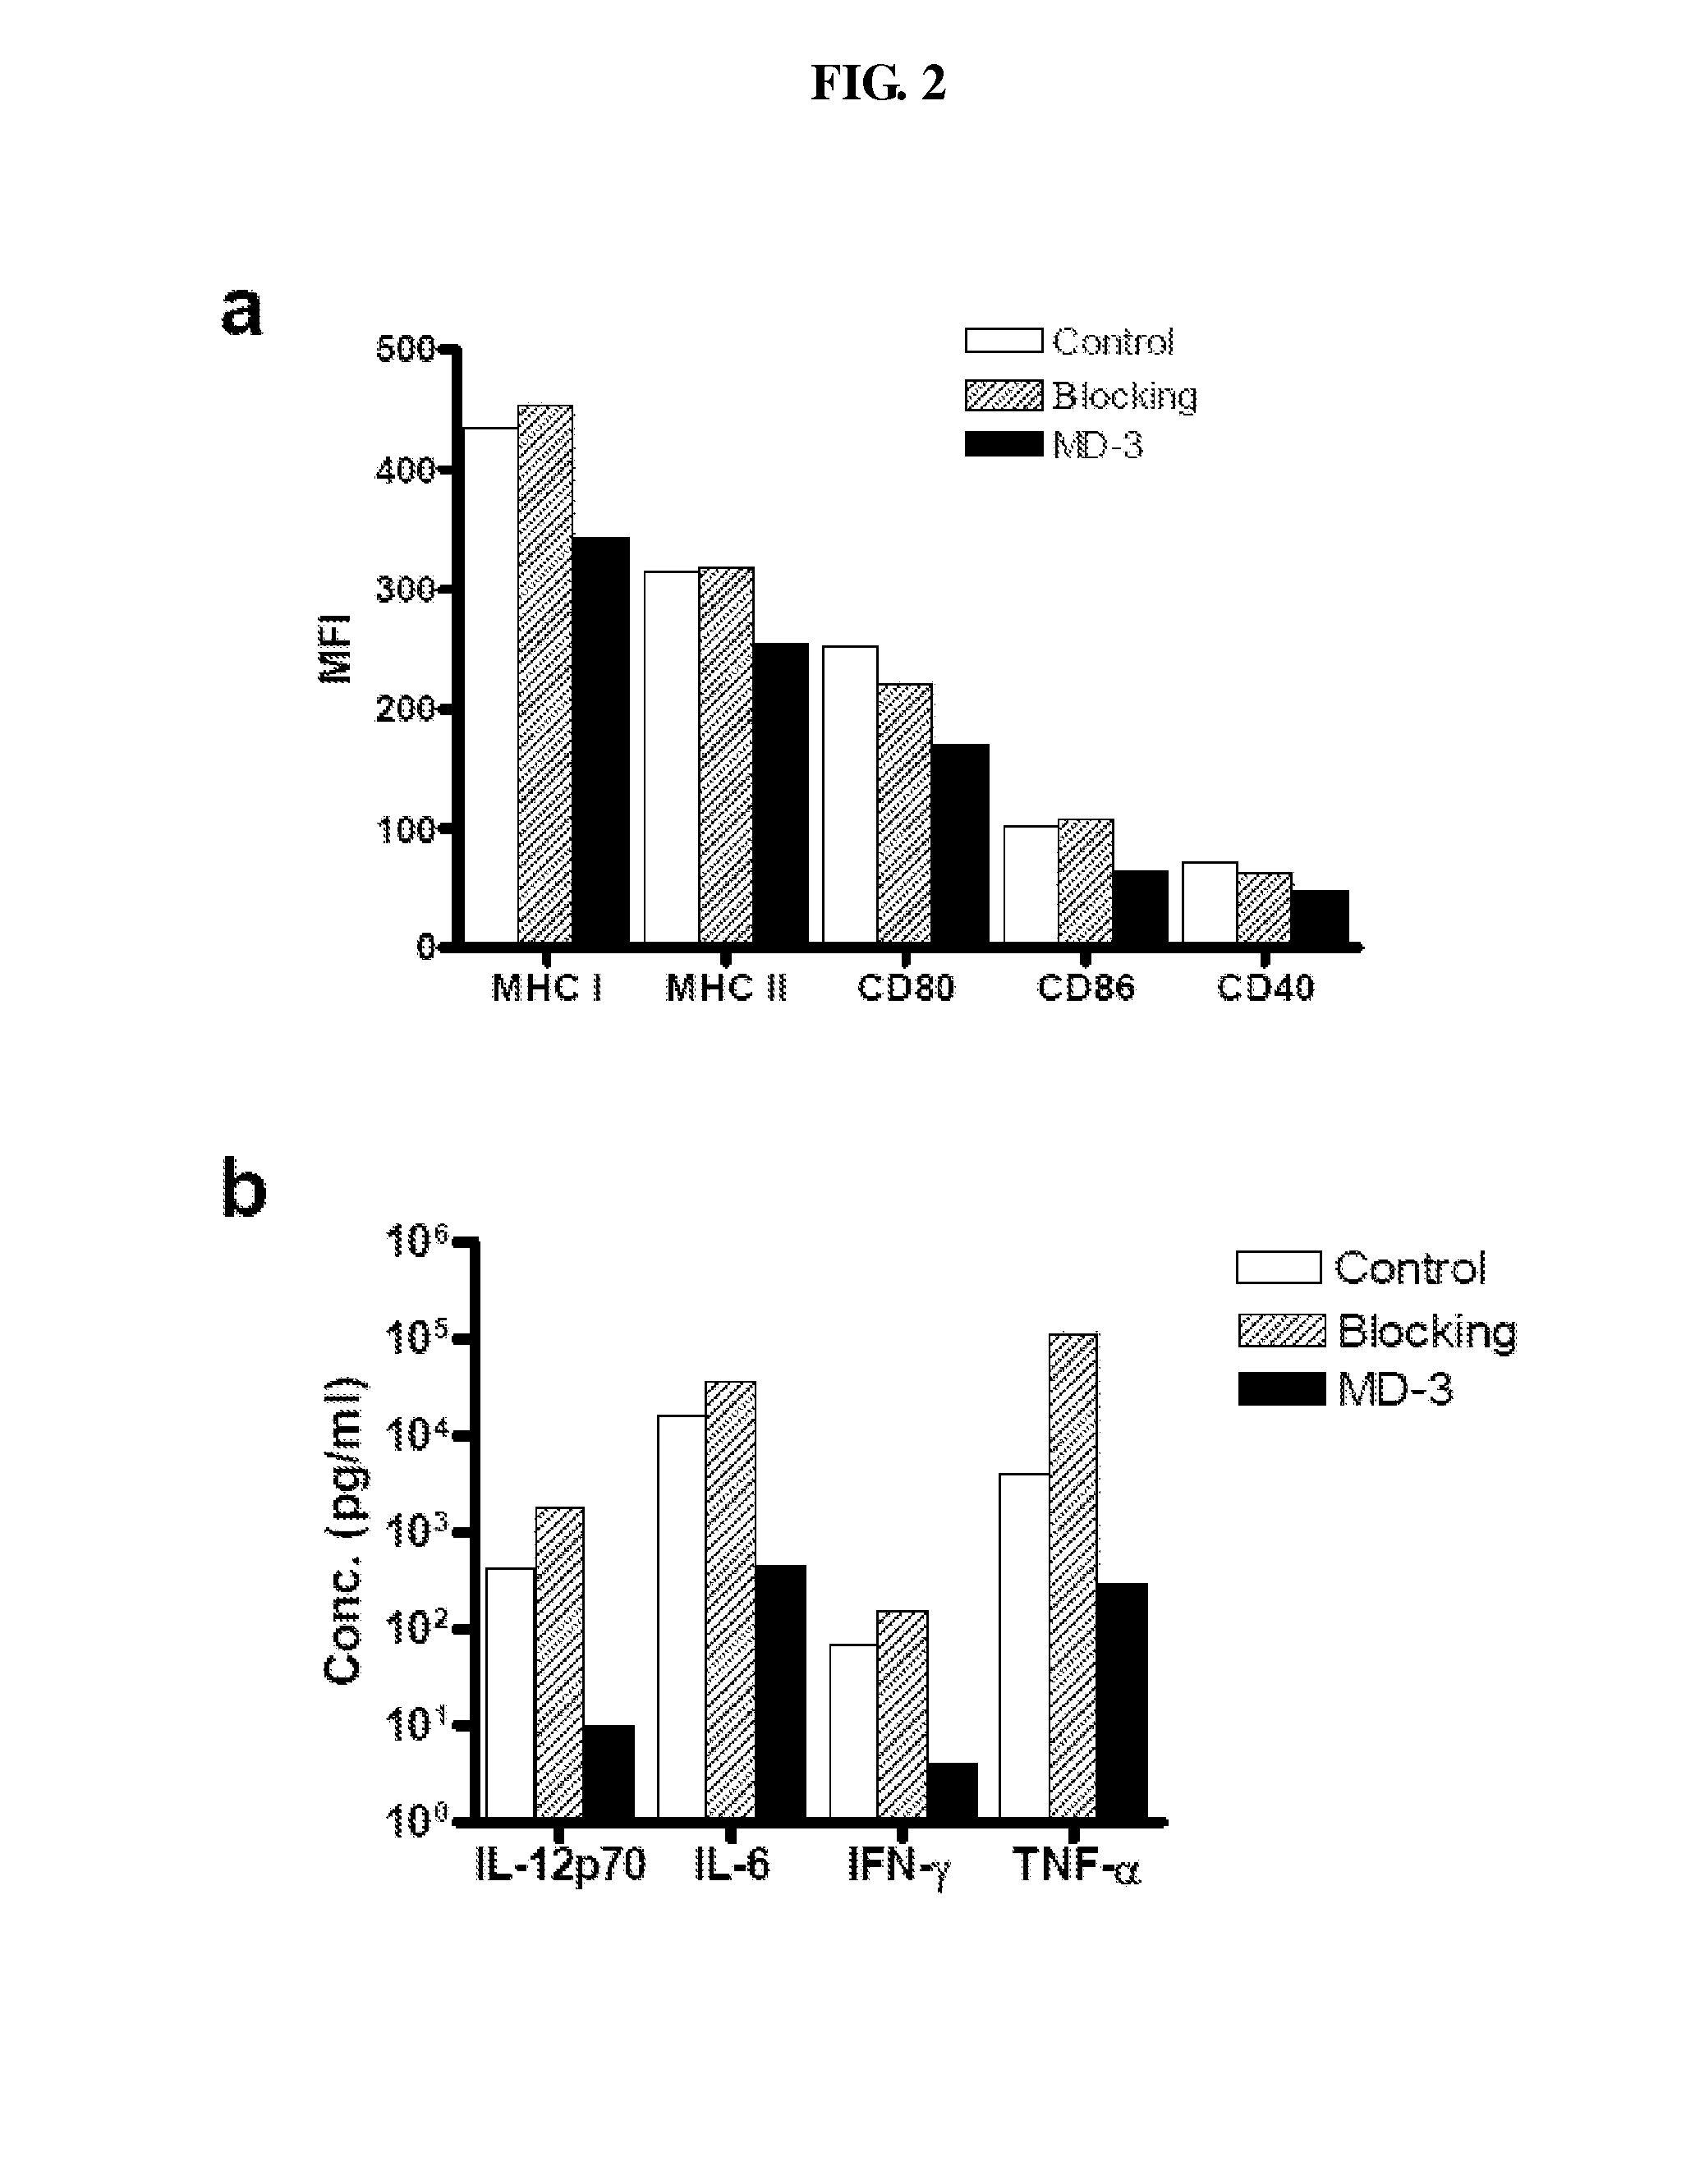 Antibody that binds domain 2 of ICAM-1 and methods of treatment